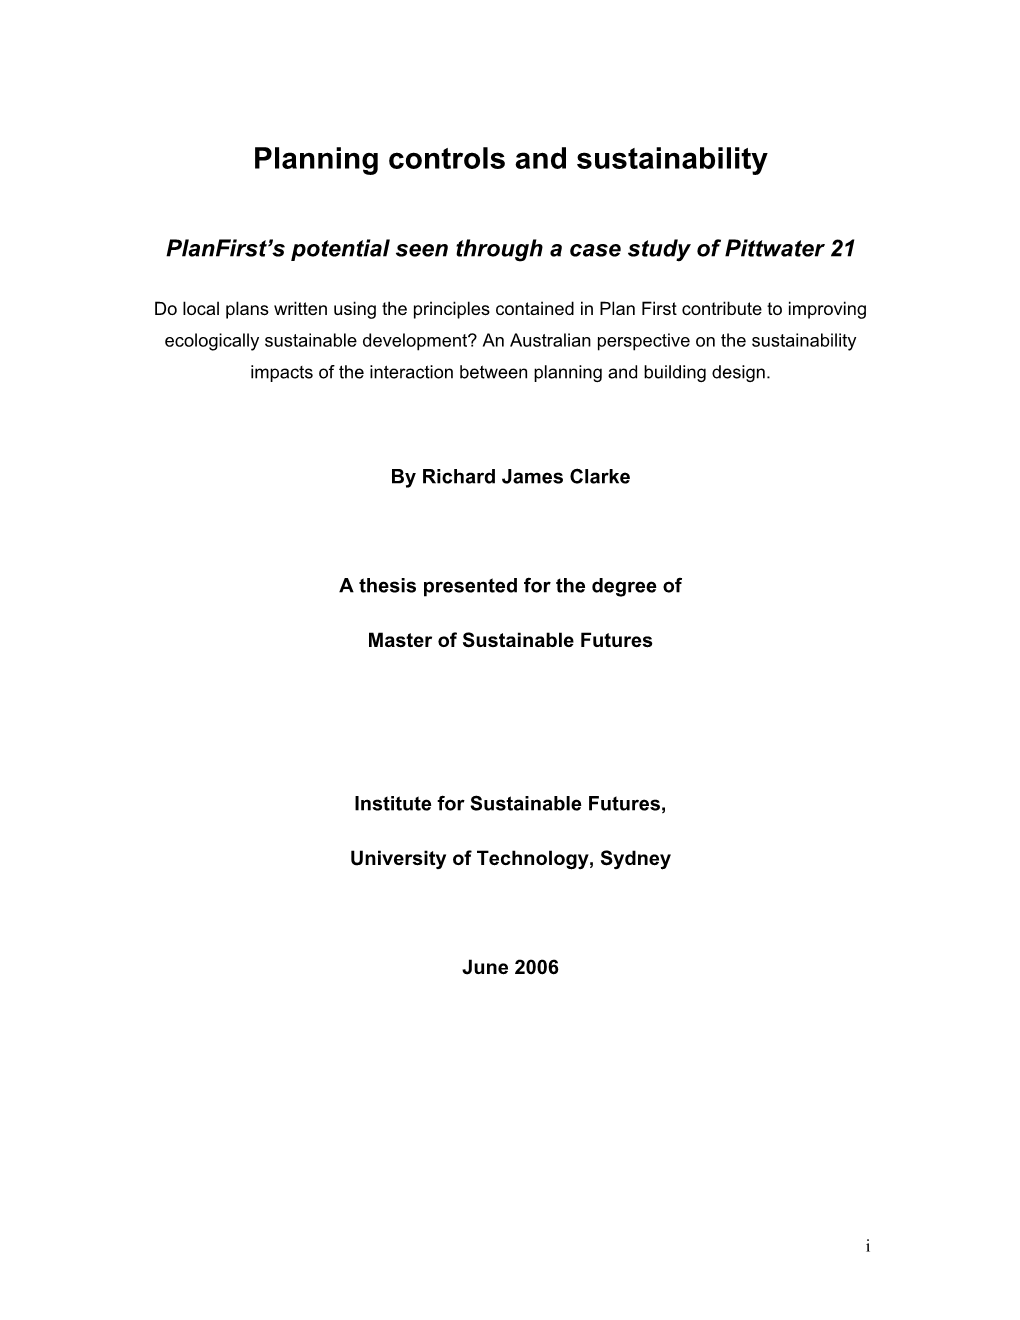 Planning Controls and Sustainability